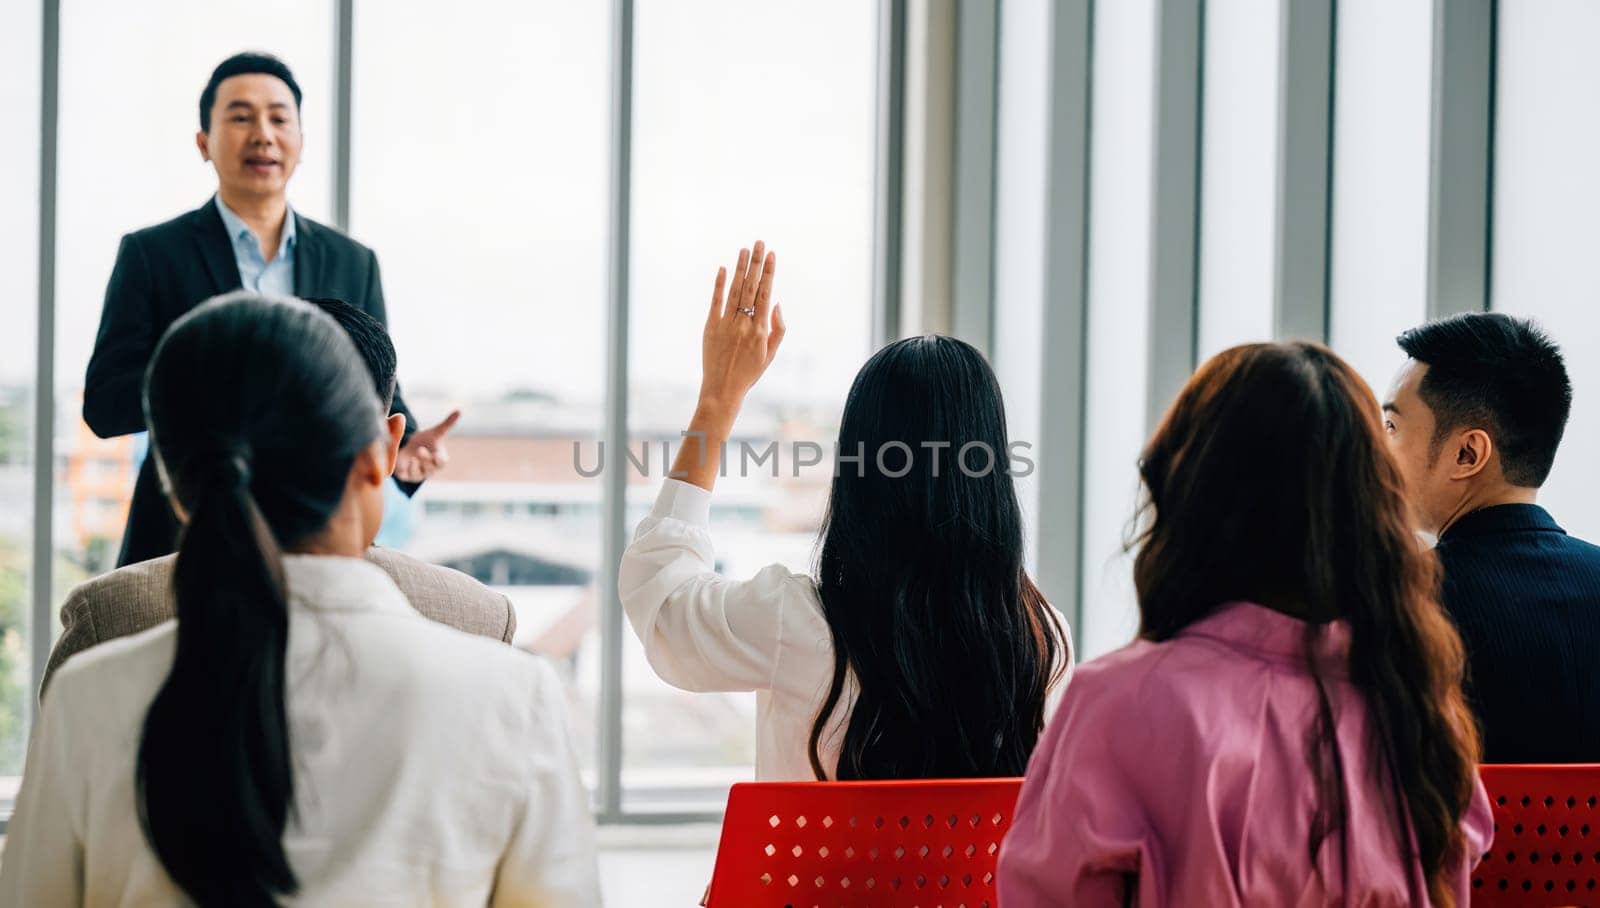 Diverse group of business professionals in seminar meeting room raises their hands reflecting active audience participation and strong sense of teamwork. It's all about question and answer concept. by Sorapop